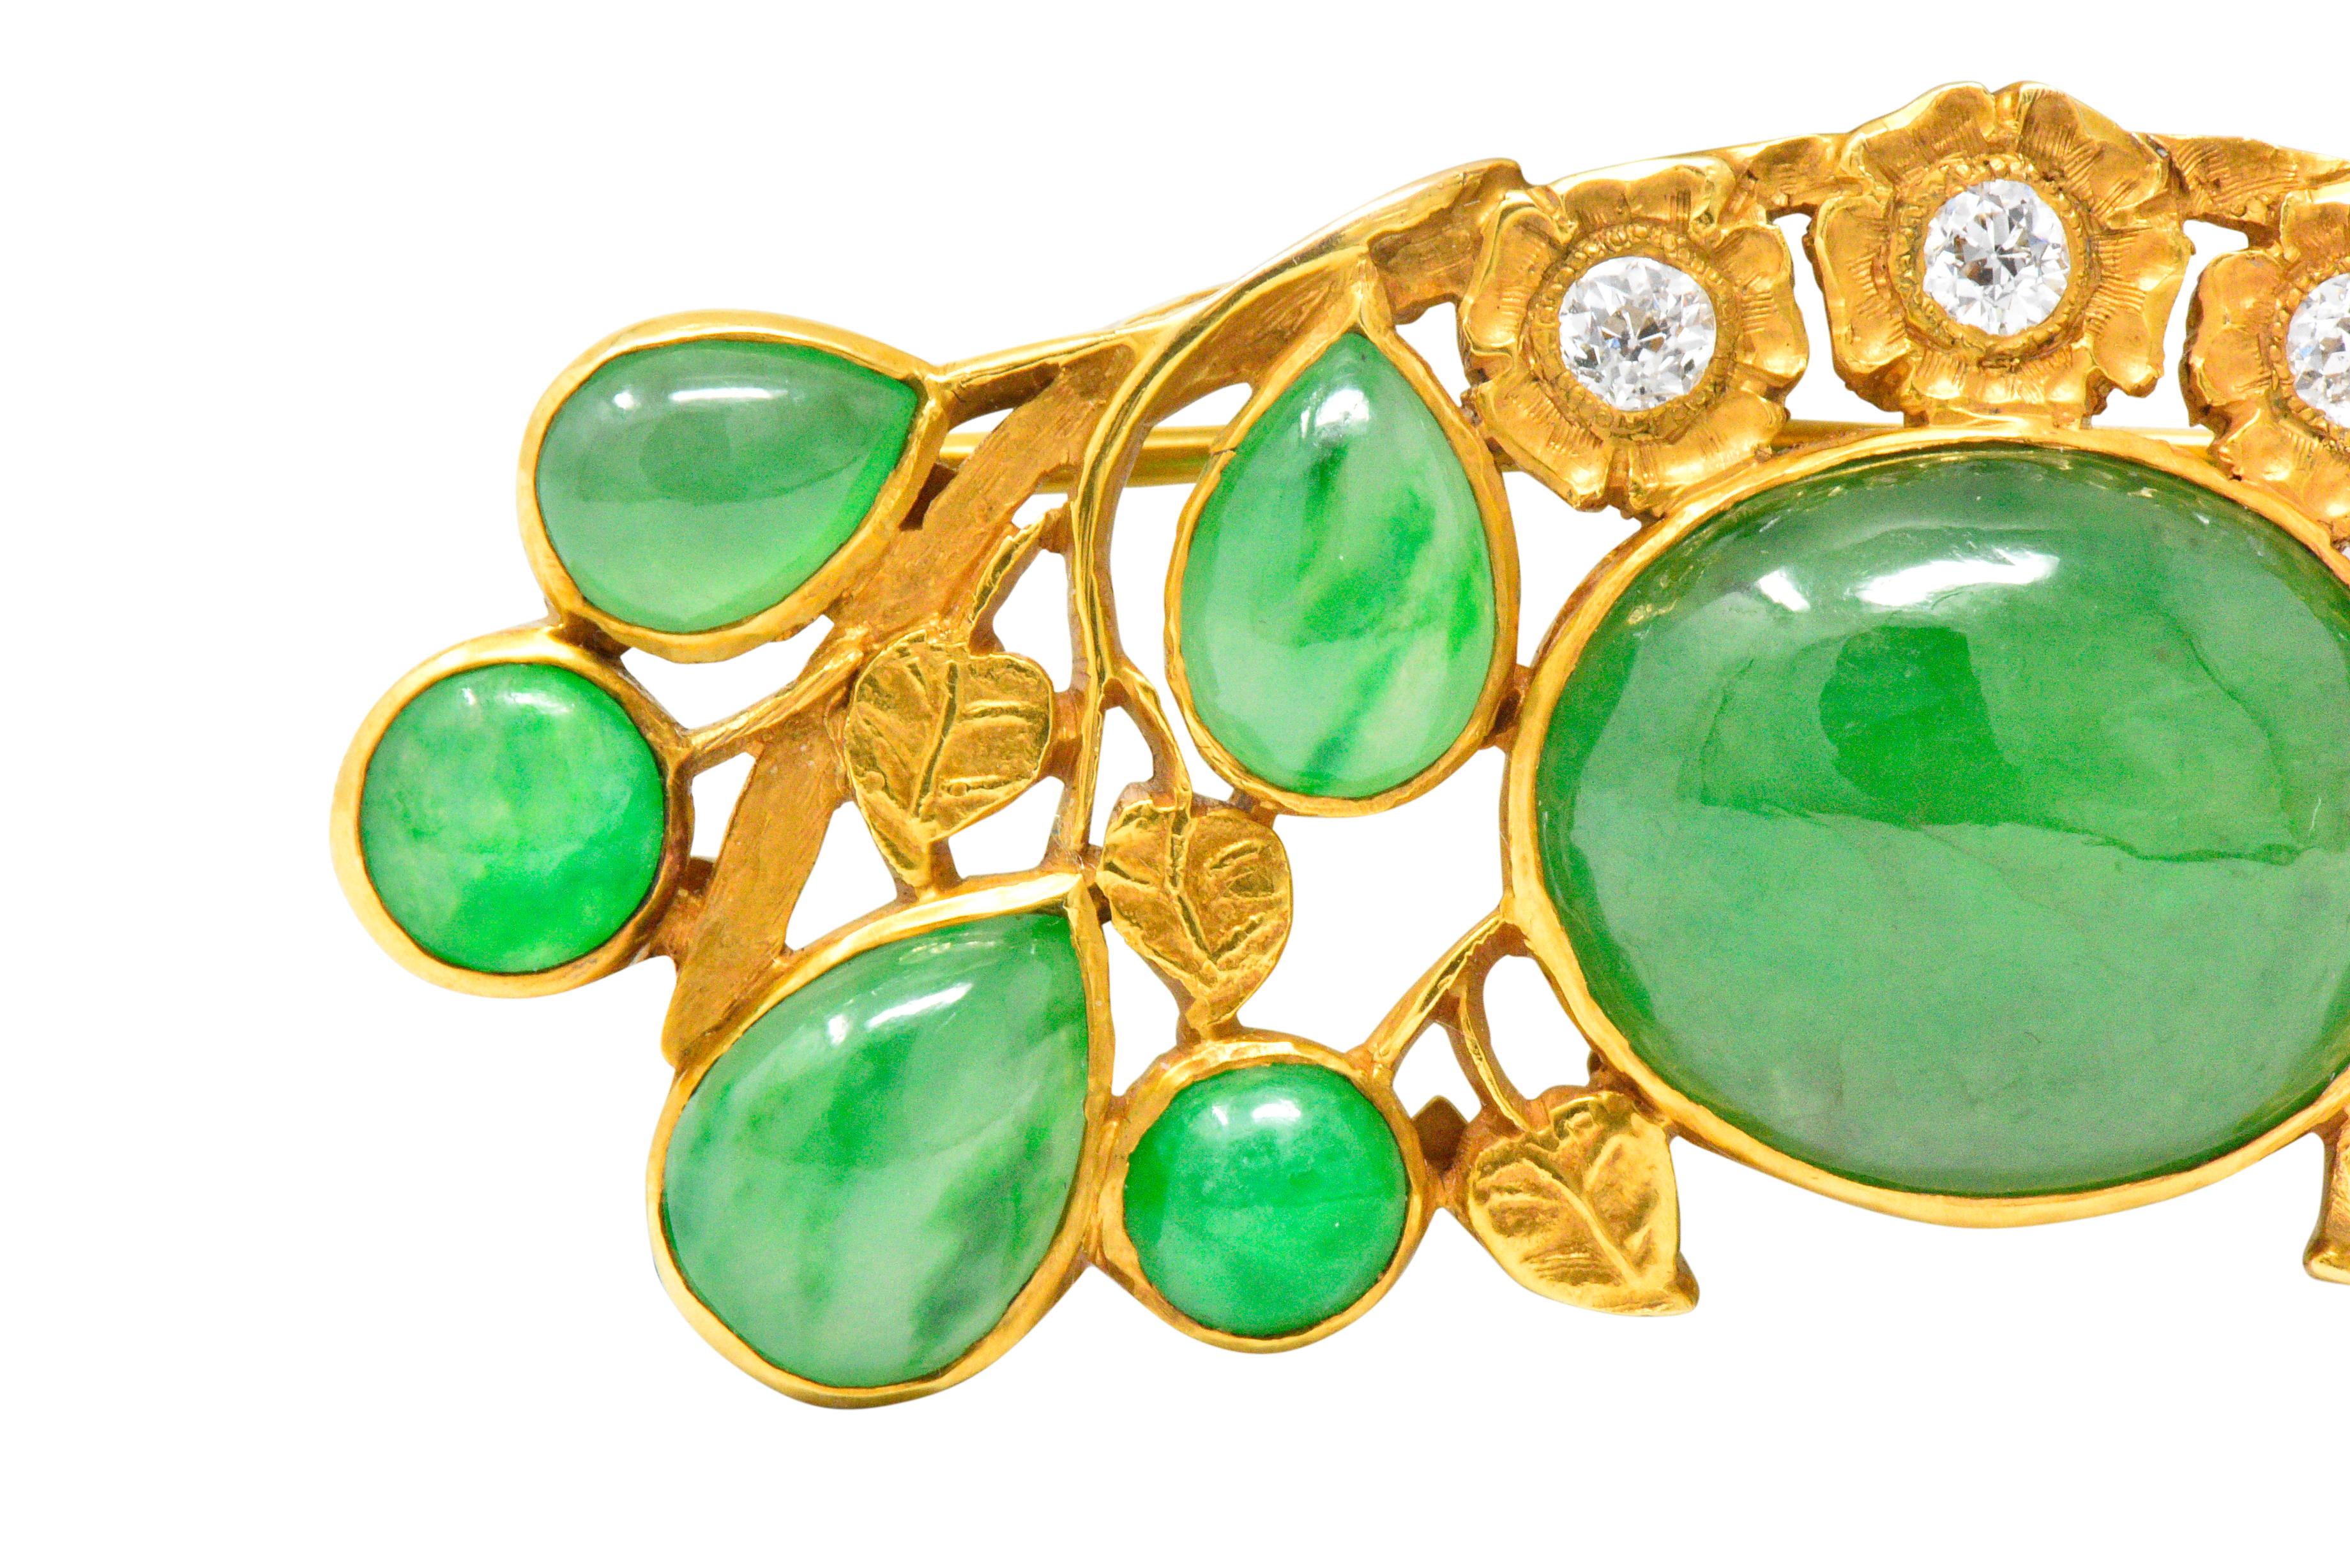 Bar style brooch designed as winding vines with highly rendered florals and foliate

Centering a substantial bezel set oval double jadeite cabochon that measures 14.1 x 13.7 mm

Translucent green with some dark green veining, Type 